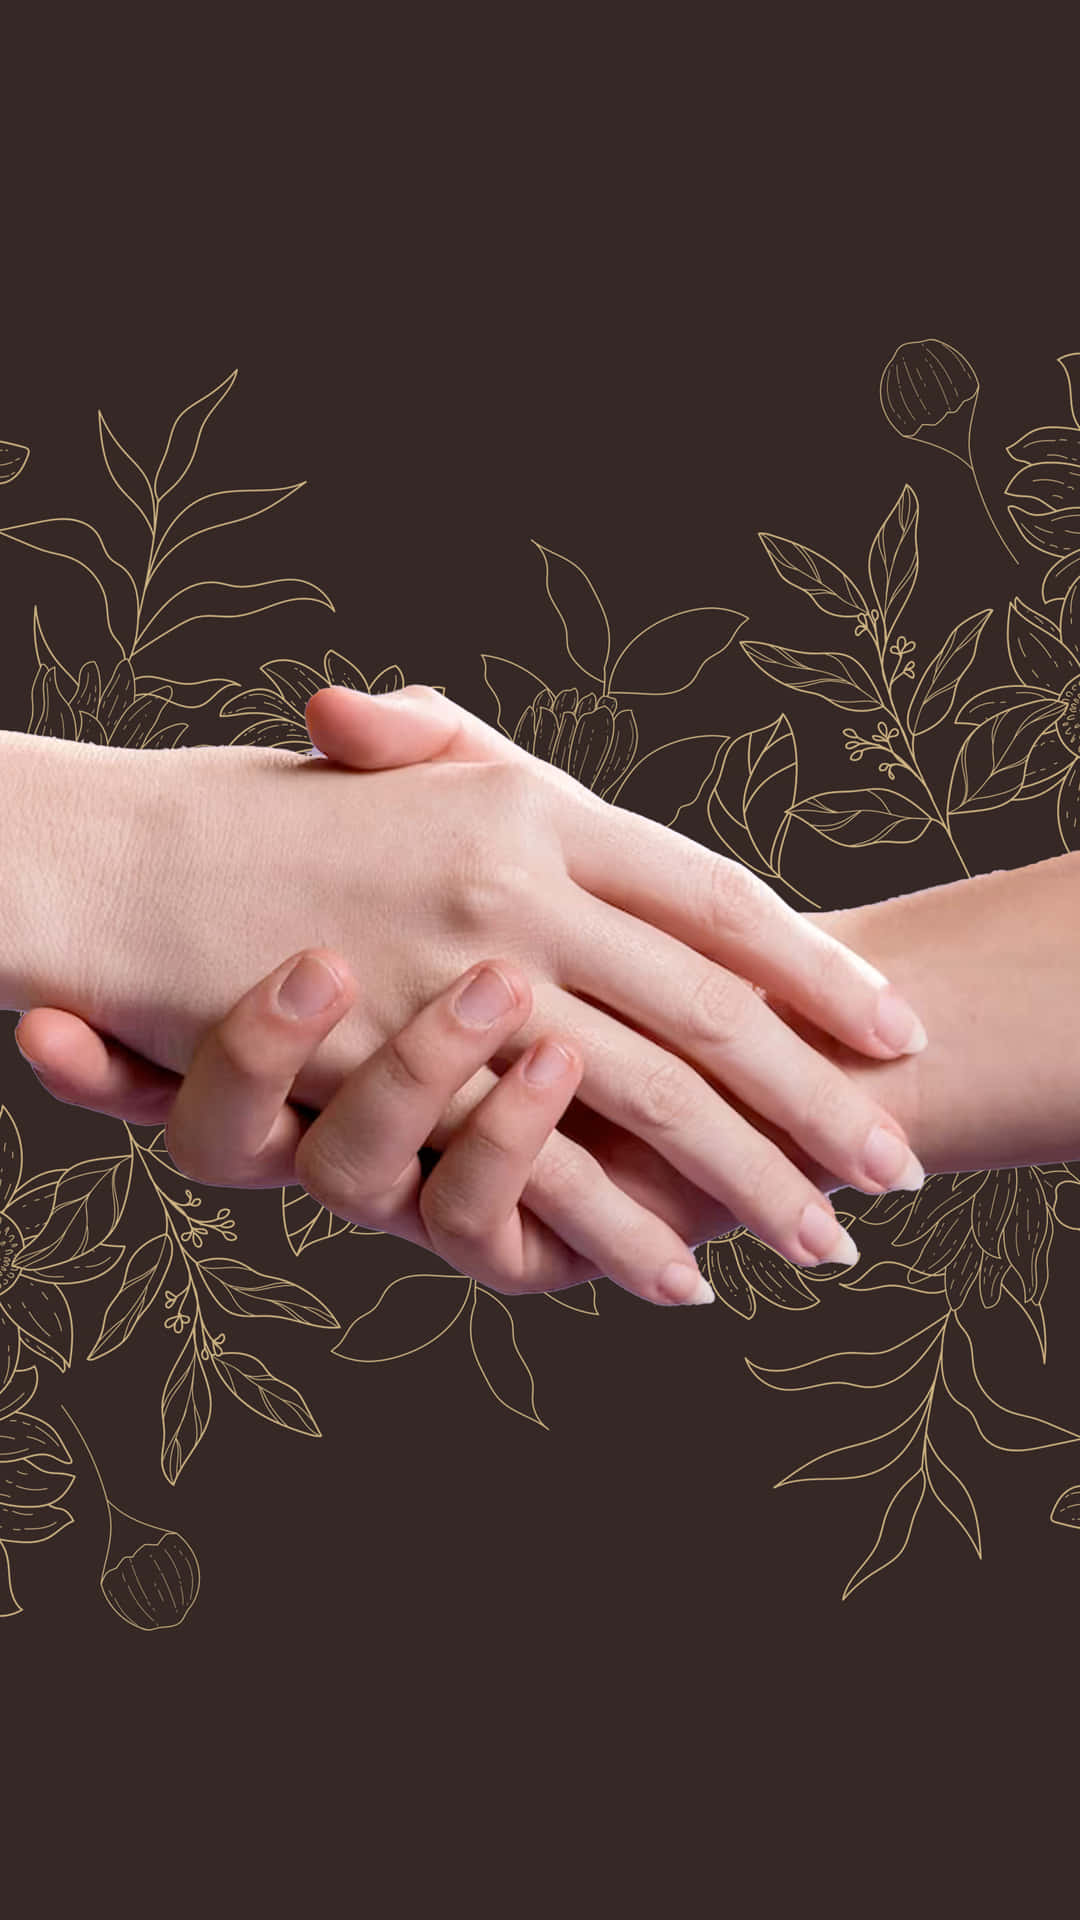 Handshake With Flower Illustrations Picture